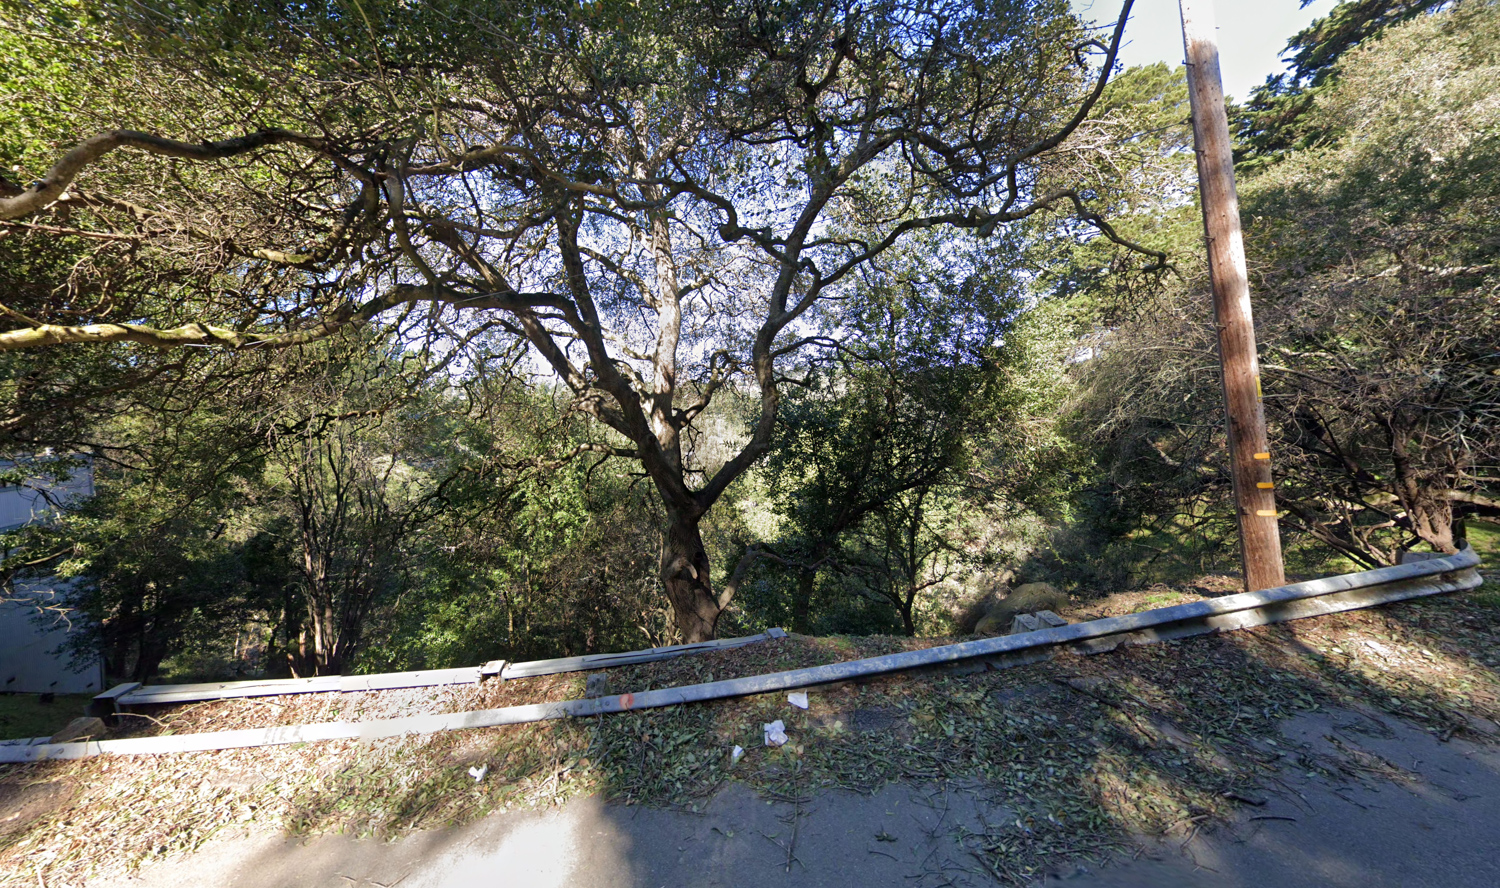 6381 Girvin Drive approximate property location, image via Google Street View